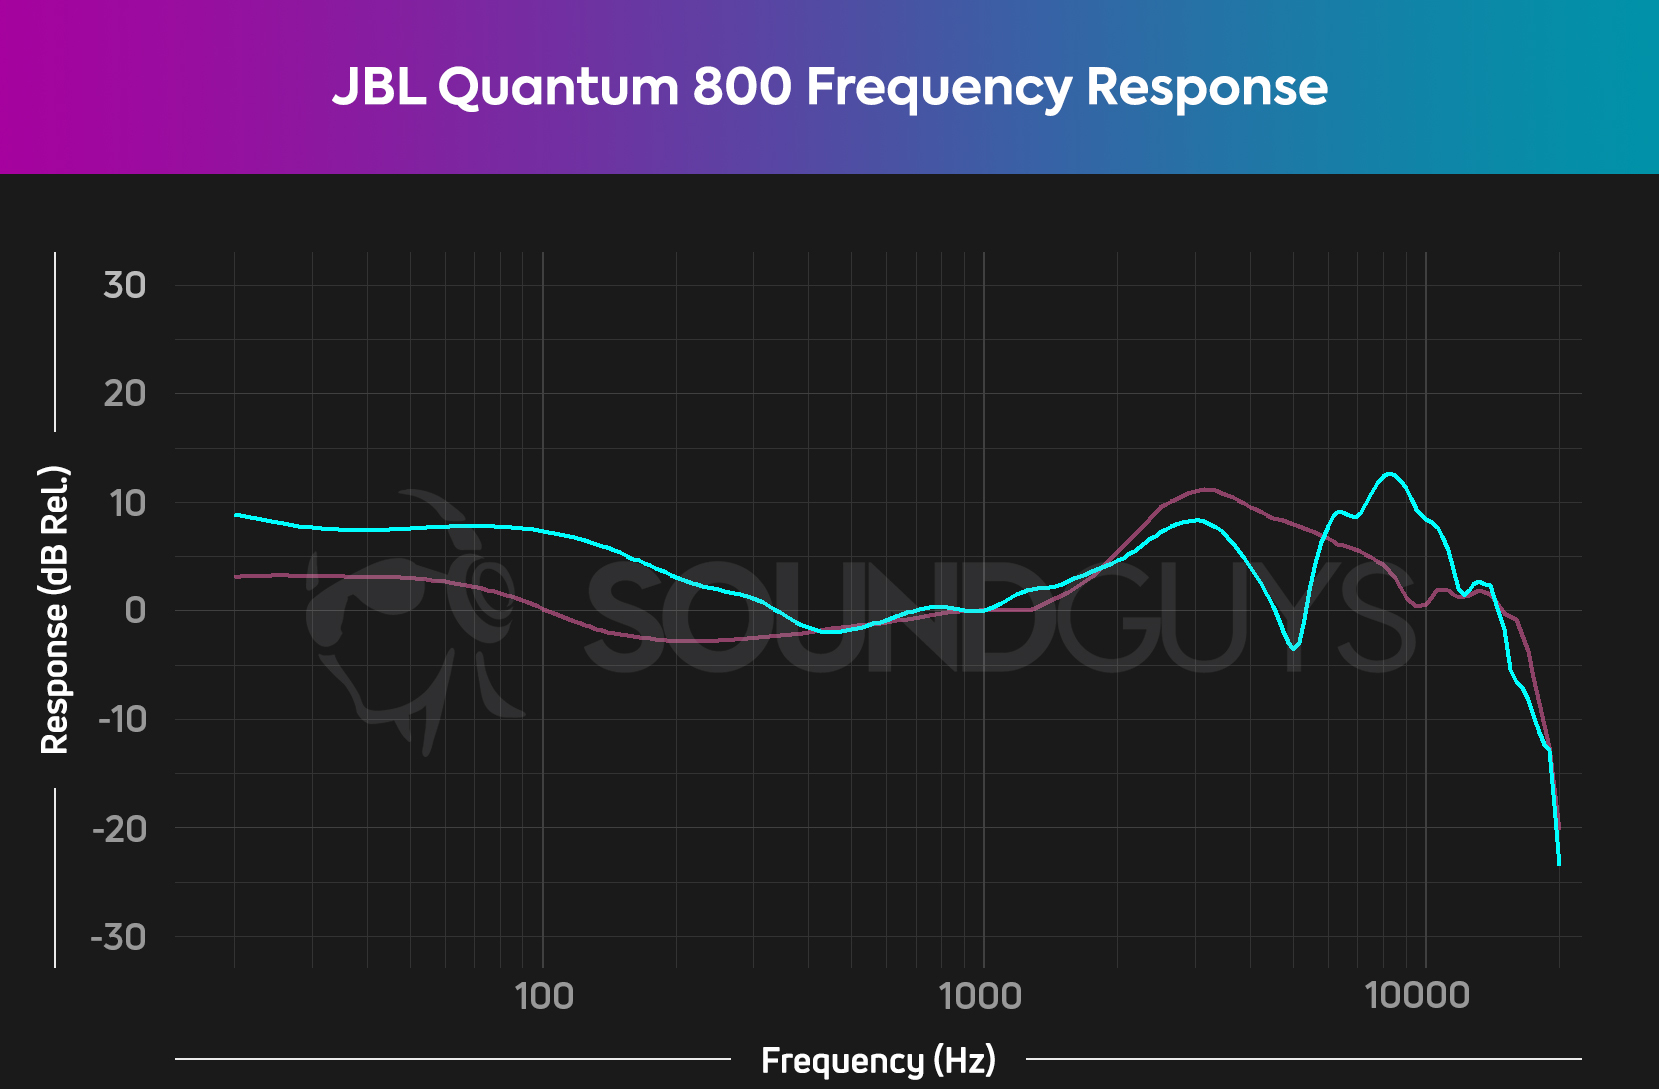 A frequency response chart for the JBL Quantum 800 gaming headset, which shows a boost in bass response